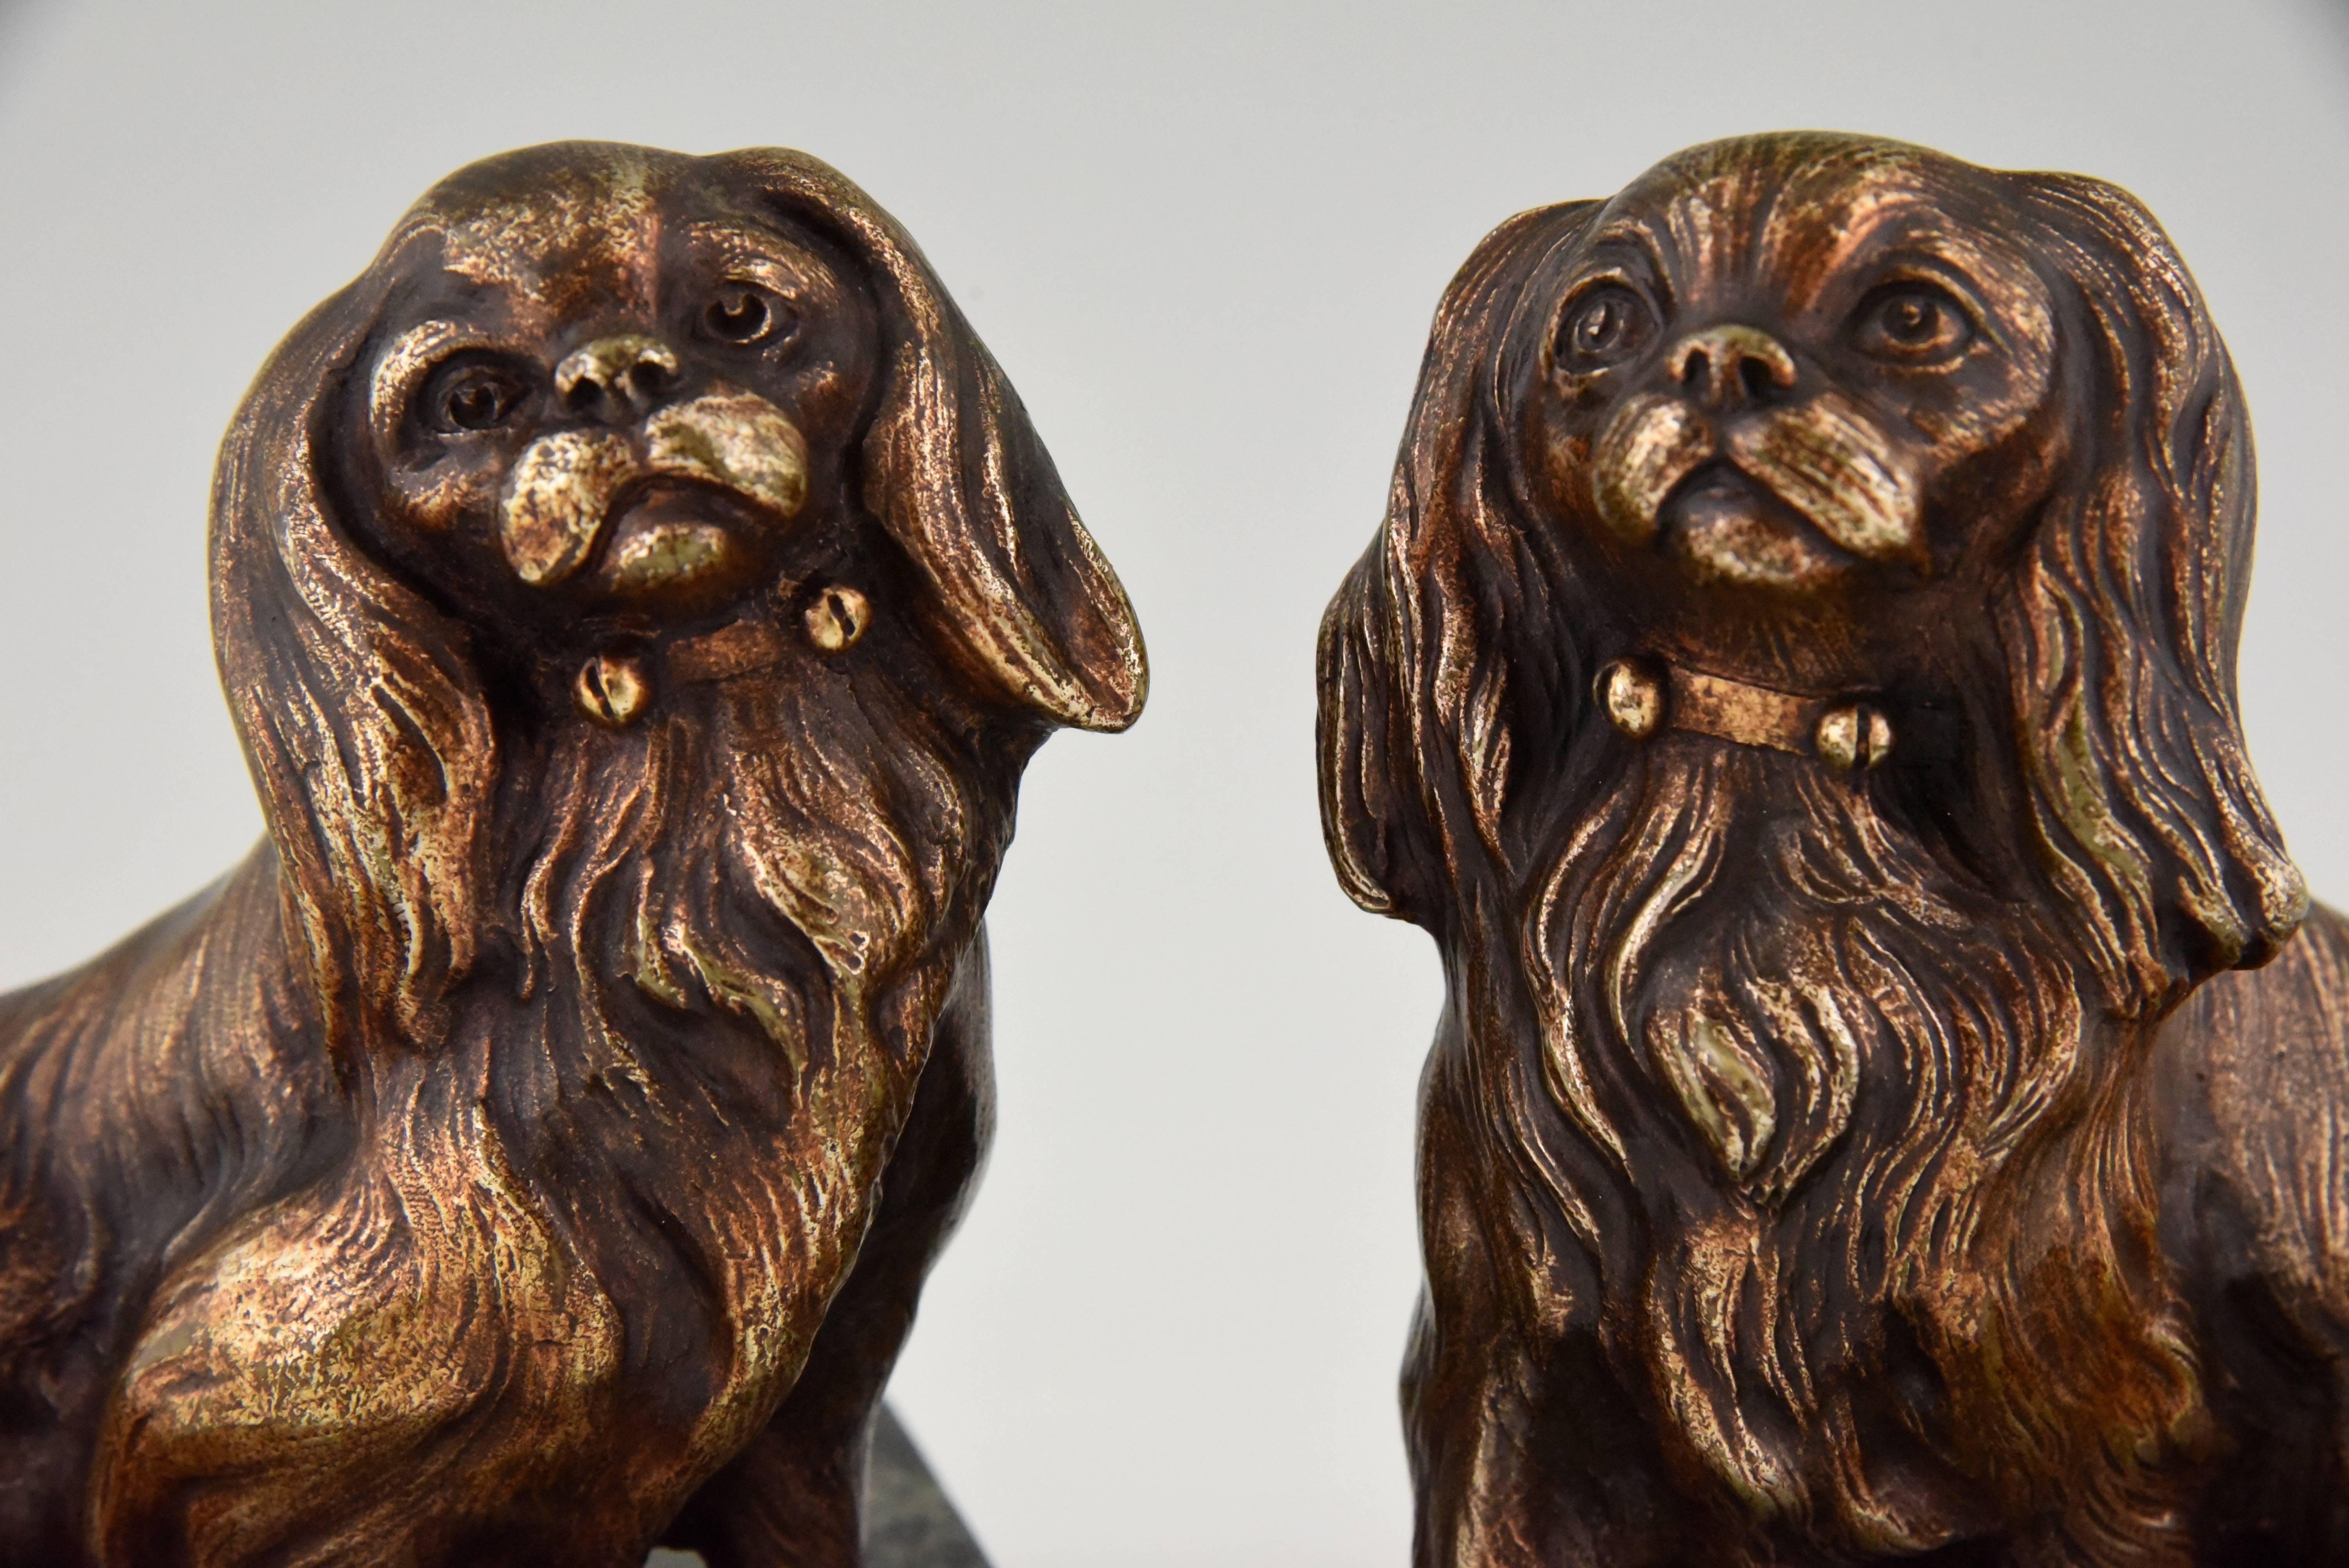 20th Century French Art Deco Bronze King Charles Spaniel Dog Bookends by Louis-Albert Carvin